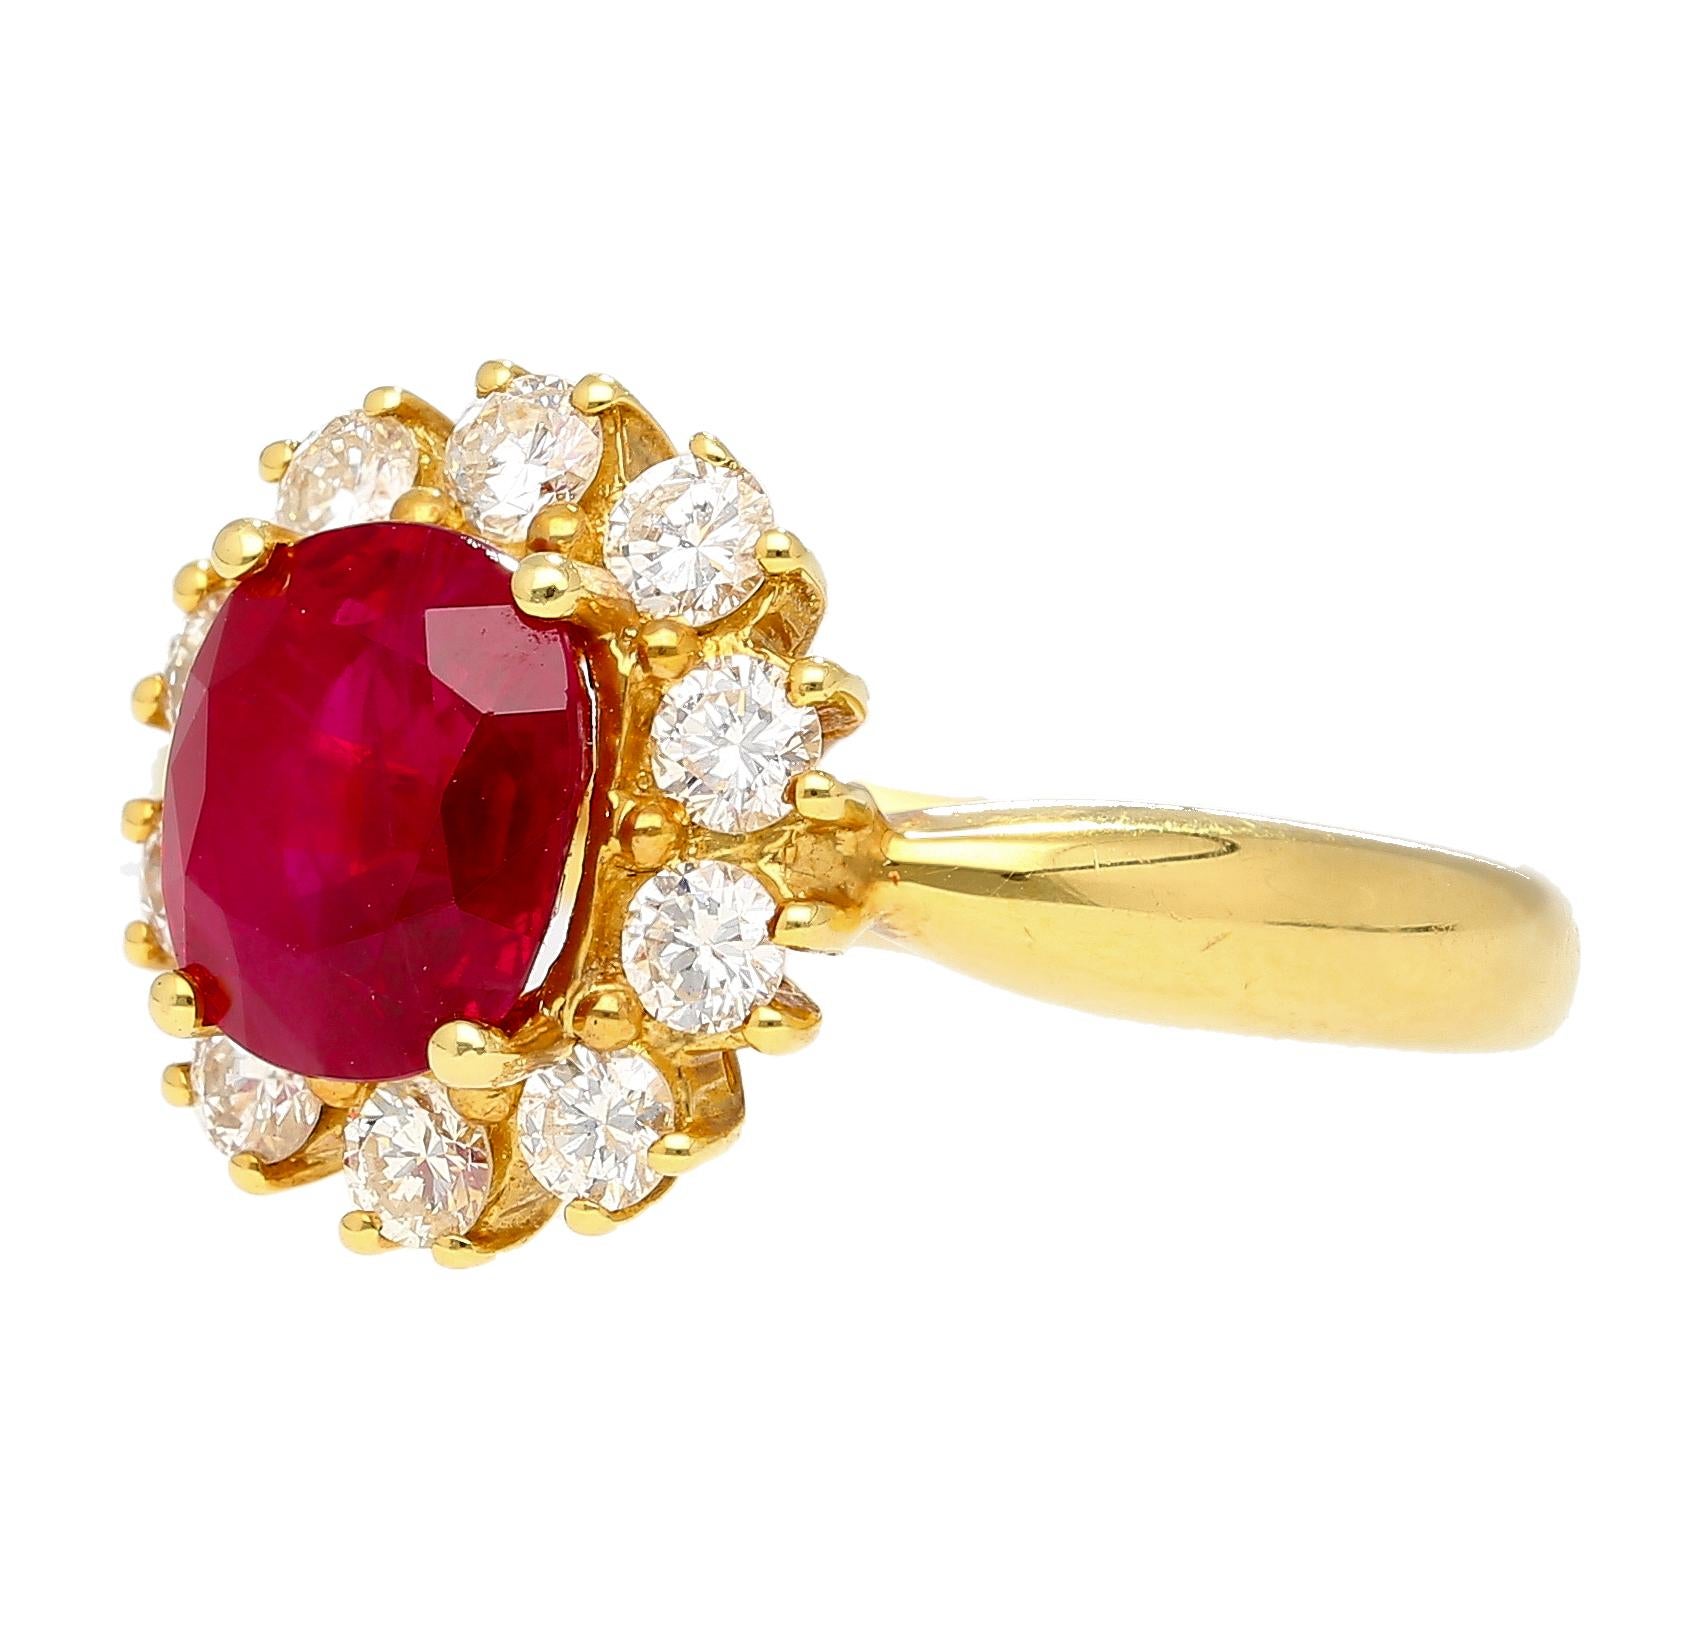 GRS certified 2.99 oval cut Burmese origin unheated ruby and diamond halo ring. Featuring a center stone that's a classic ruby red. The ruby is full of life and brilliance with no inclusions on the surface. Open back ring setting and a wide shank at